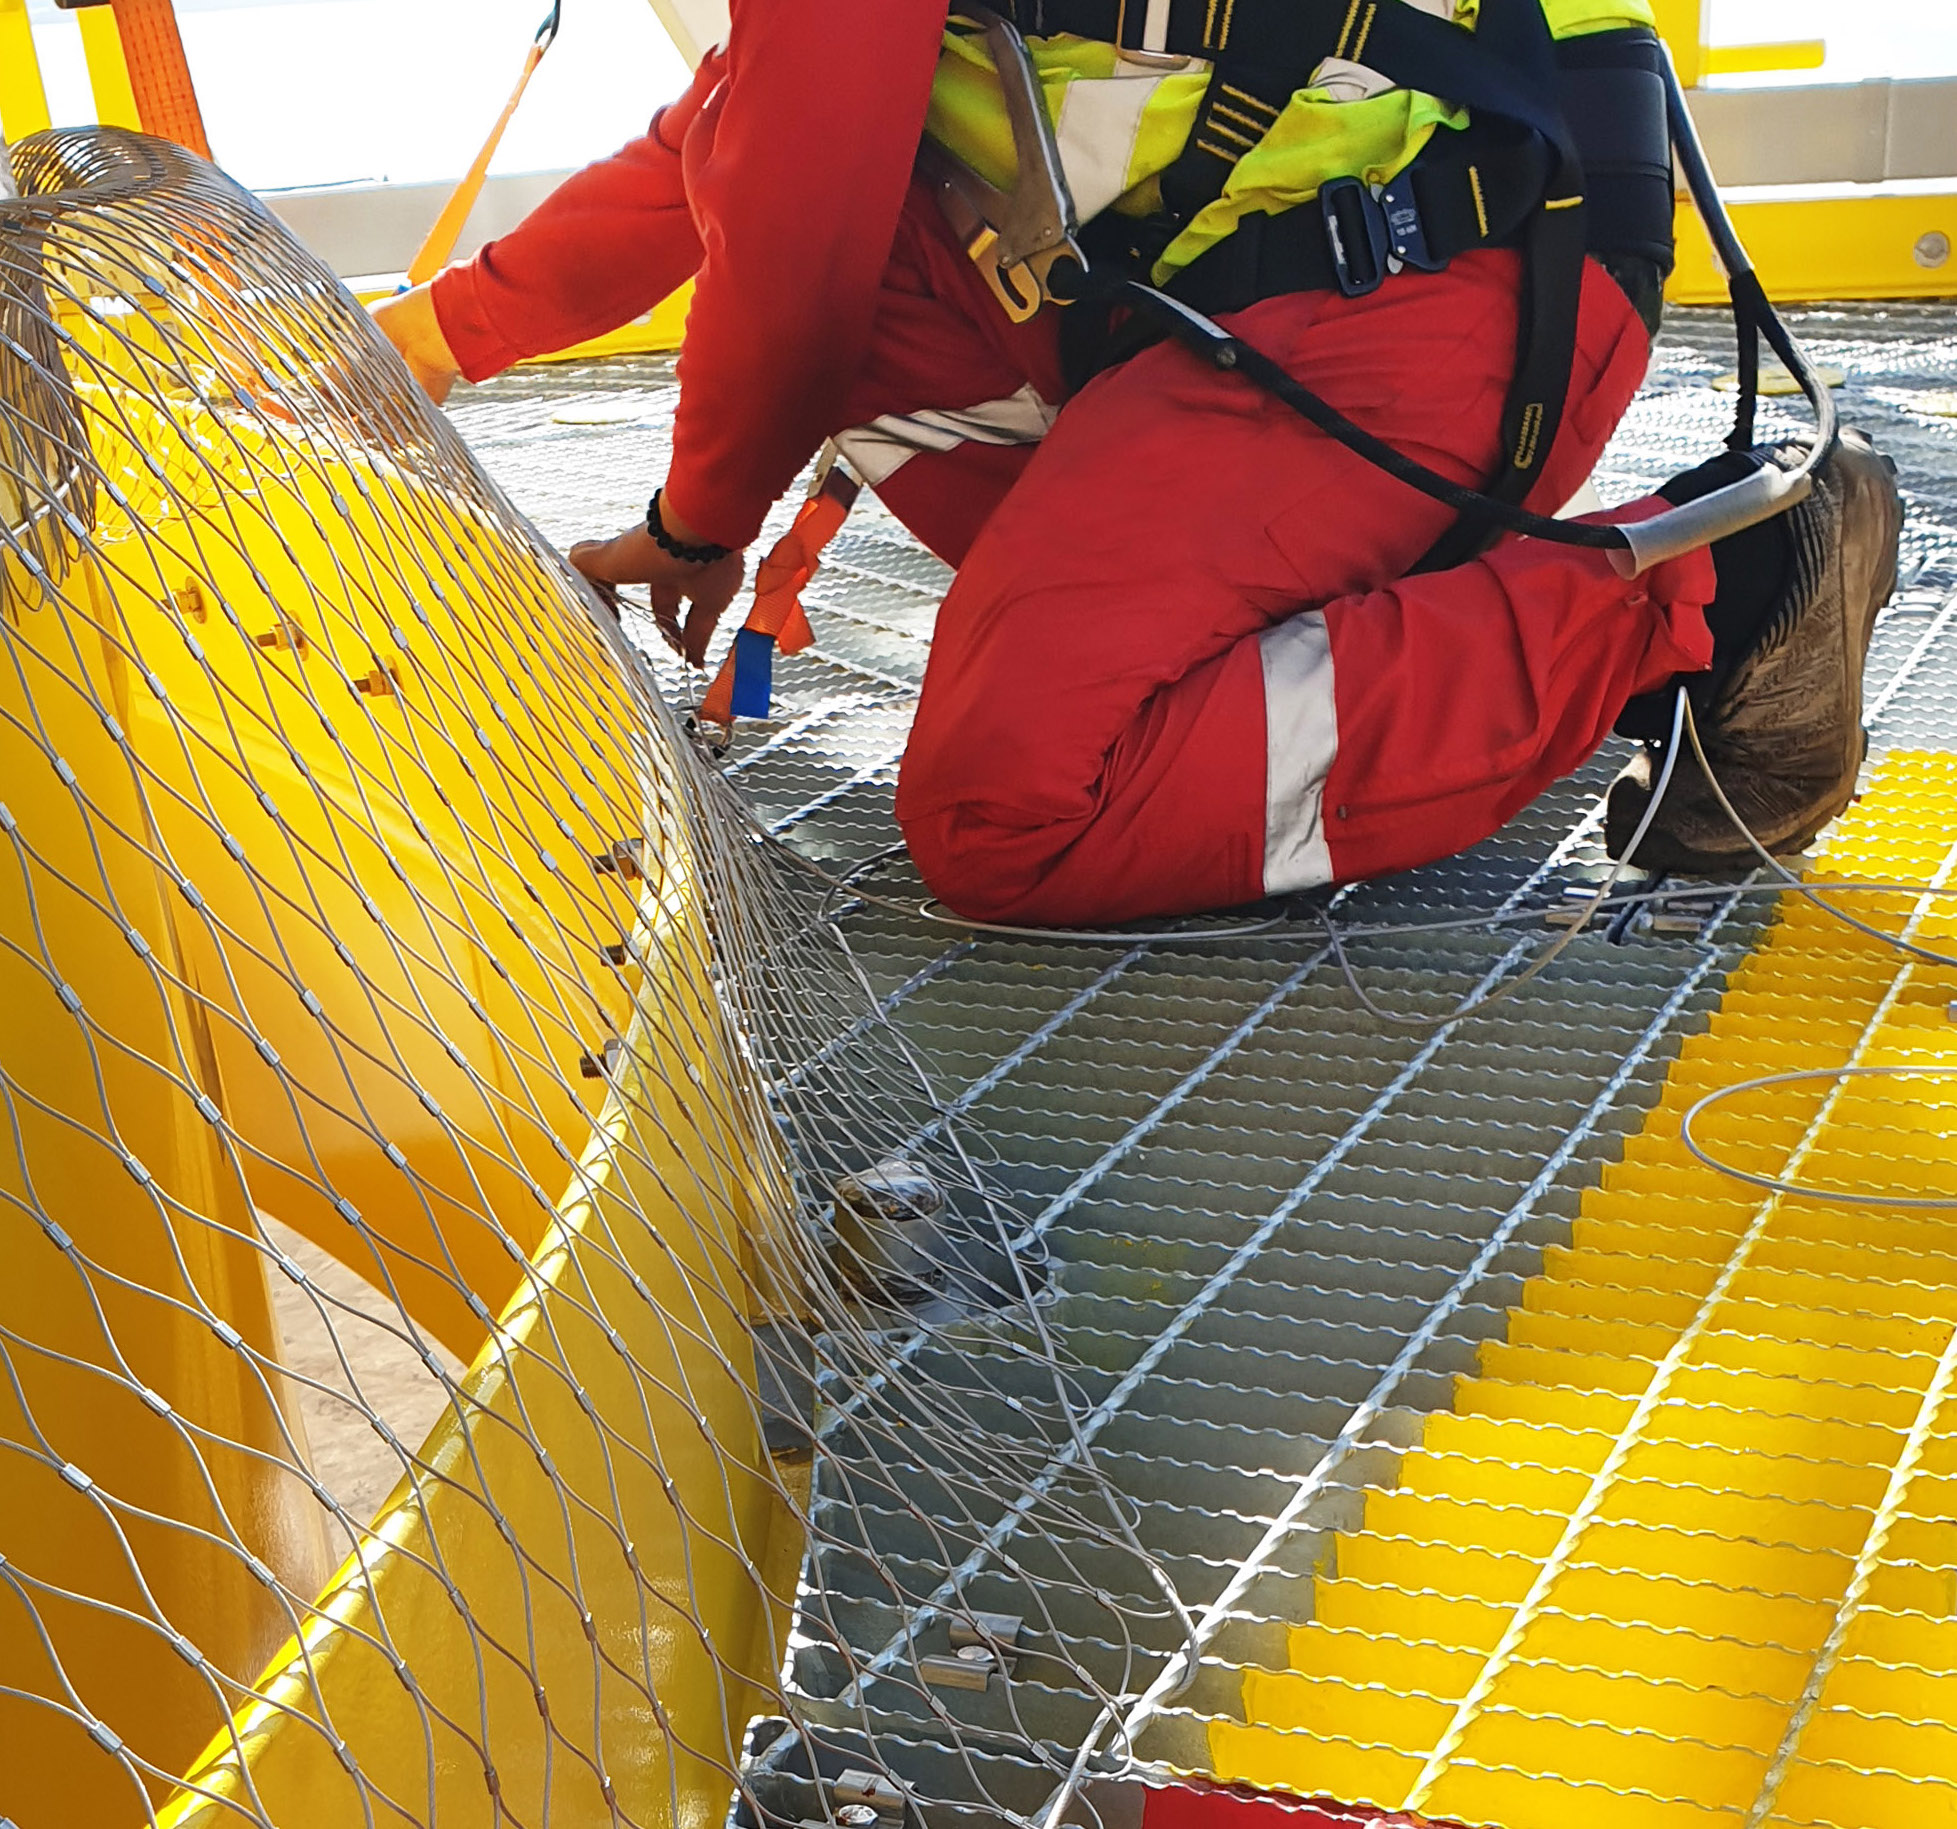 Dropsafe net being installed at Formosa 1 offshore wind farm